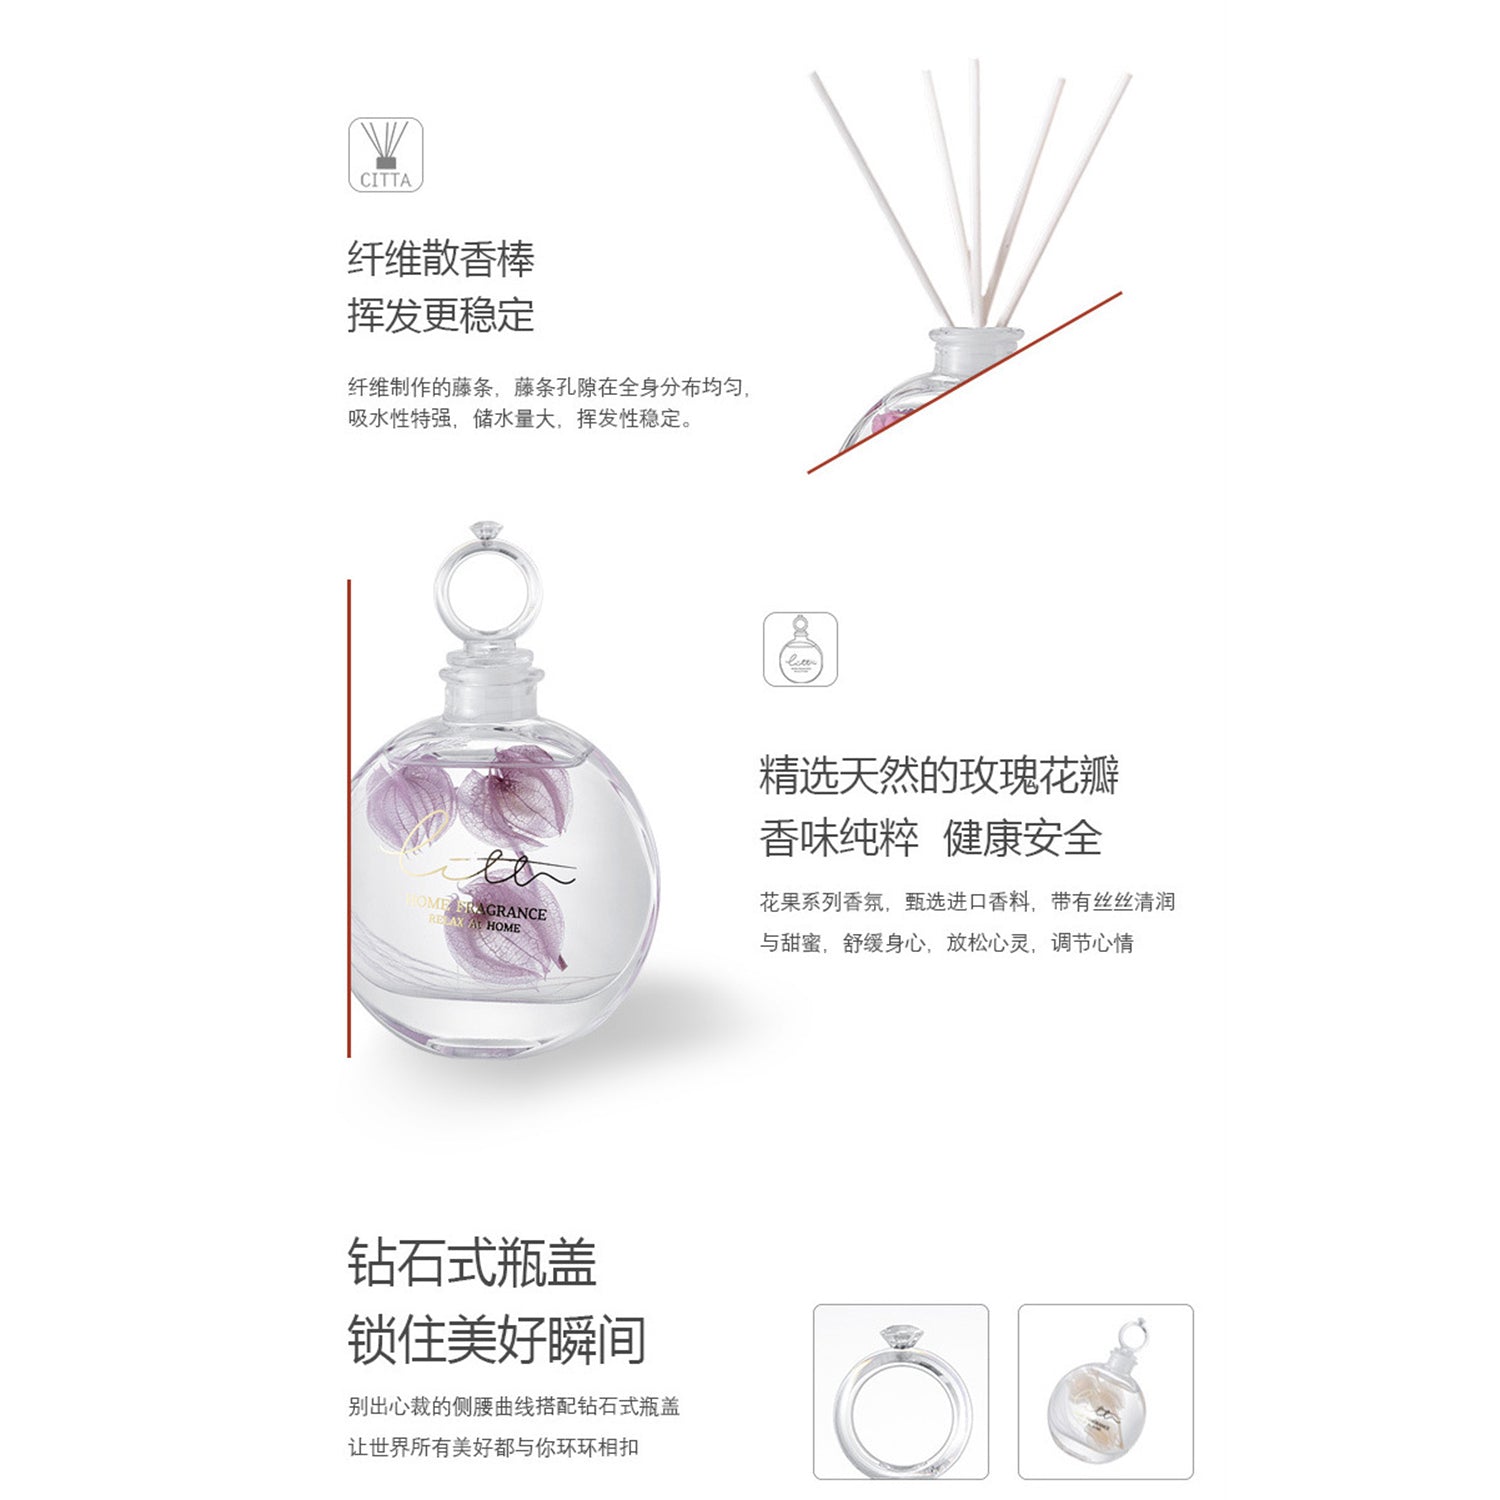 CITTA Cape Gooseberry Series Reed Diffuser Aromatherapy 100ML Premium Essential Oil with Reed Stick Reed Diffuser CITTA 